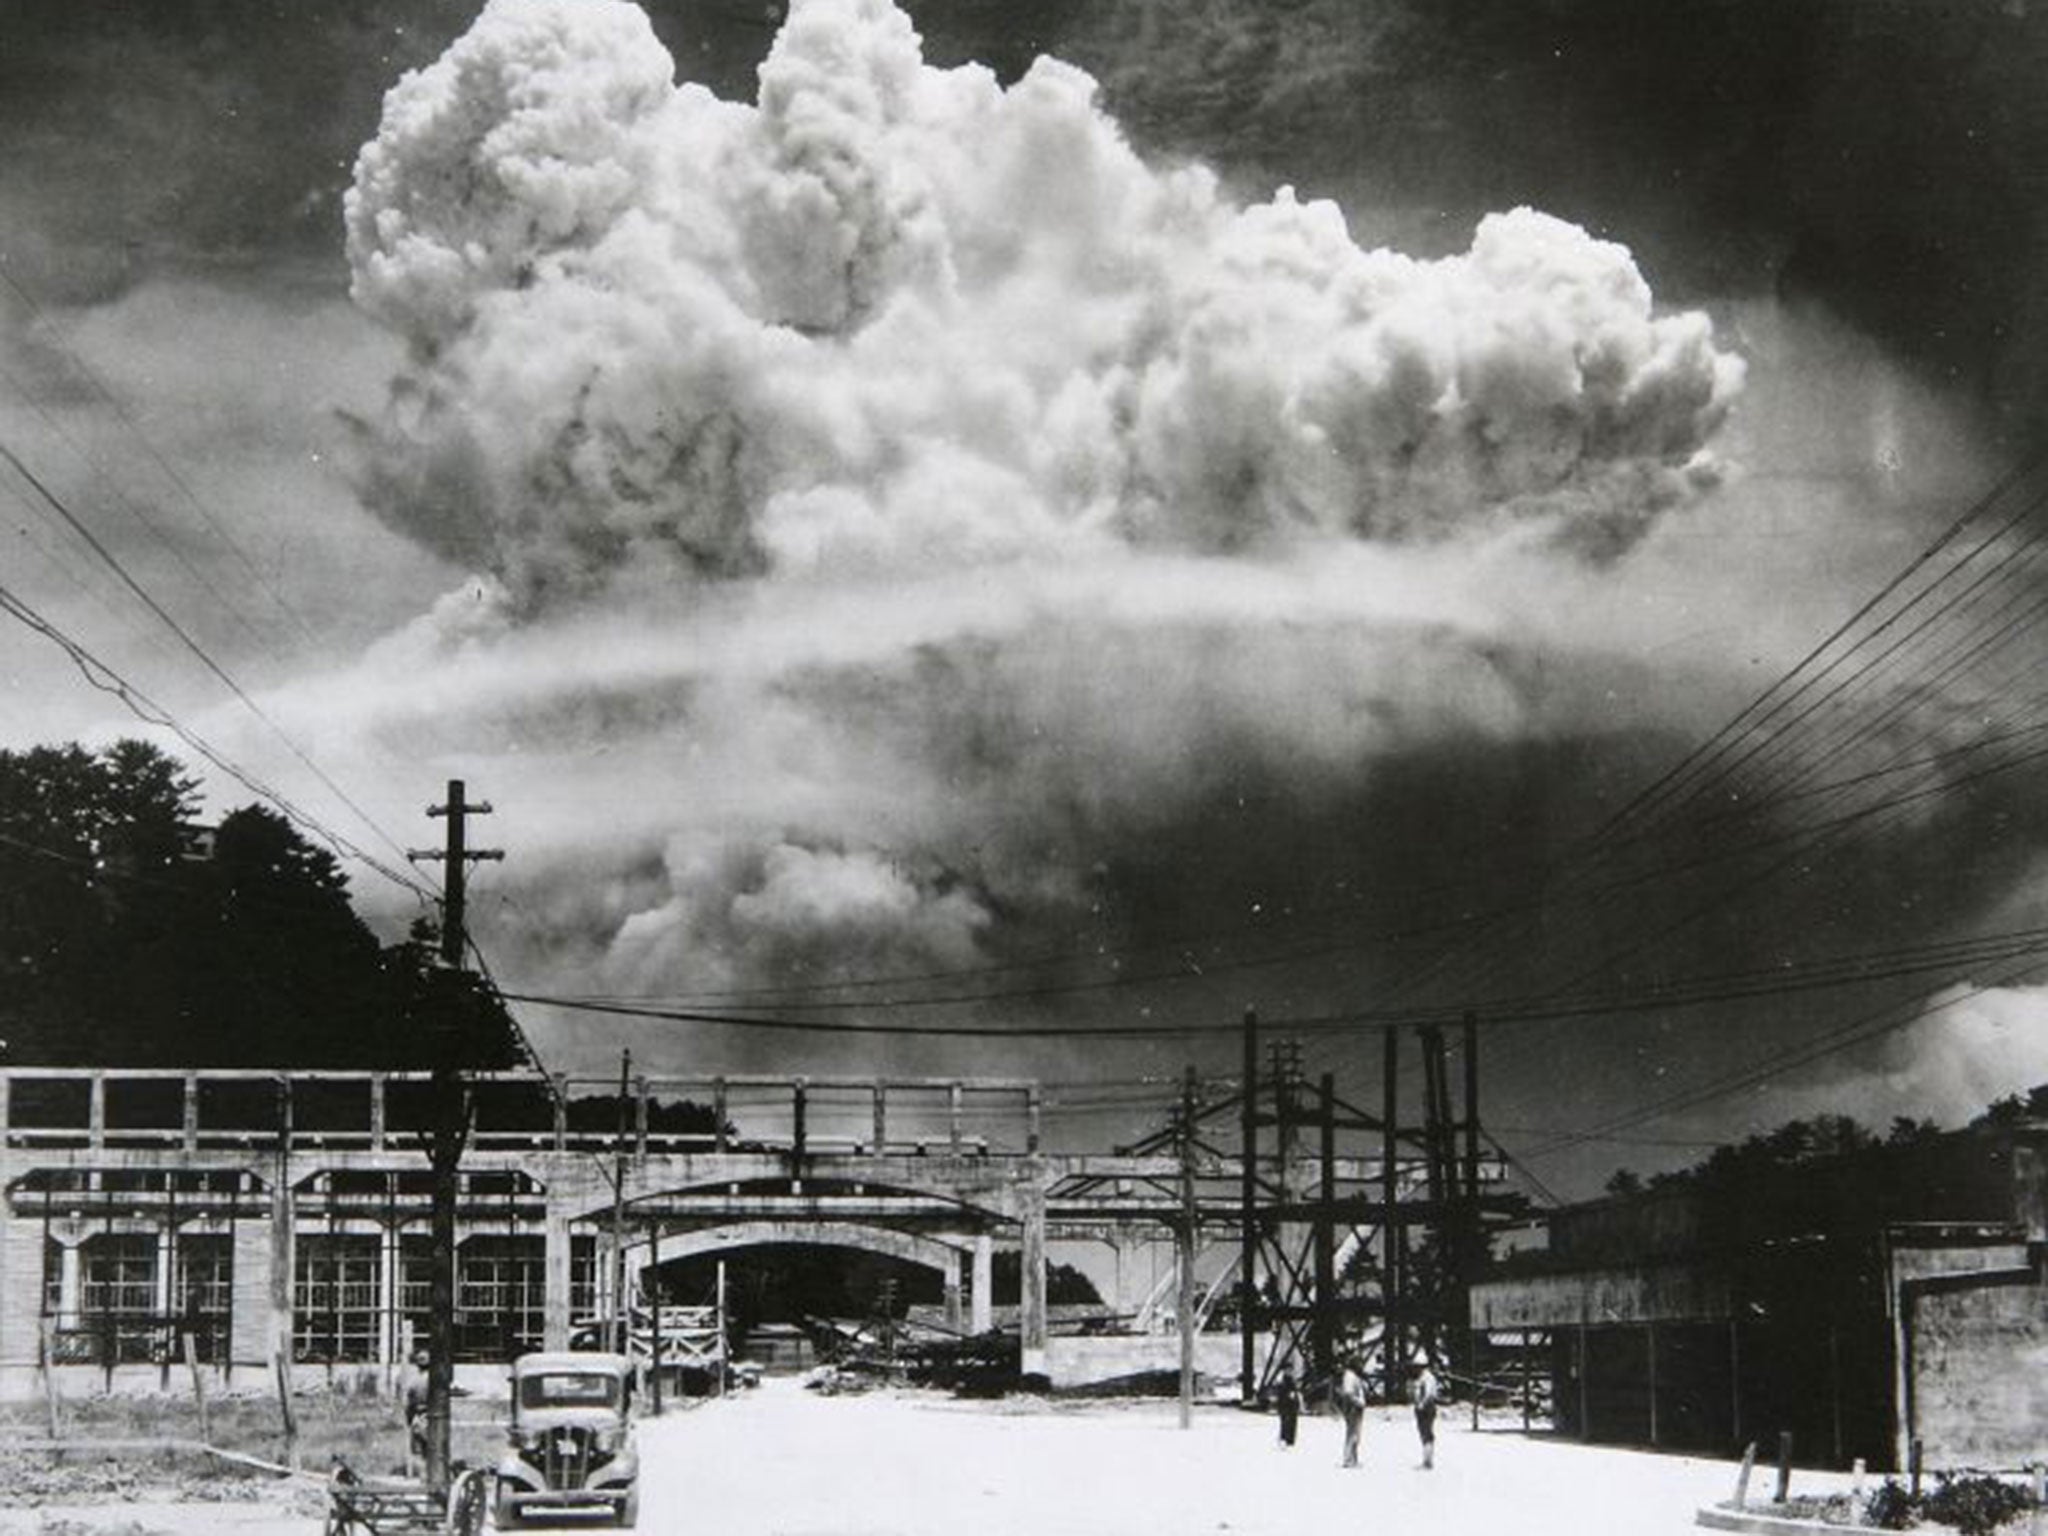 View of the radioactive plume from the bomb dropped on Nagasaki City, as seen from 9.6 km away, in Koyagi-jima, Japan, August 9, 1945